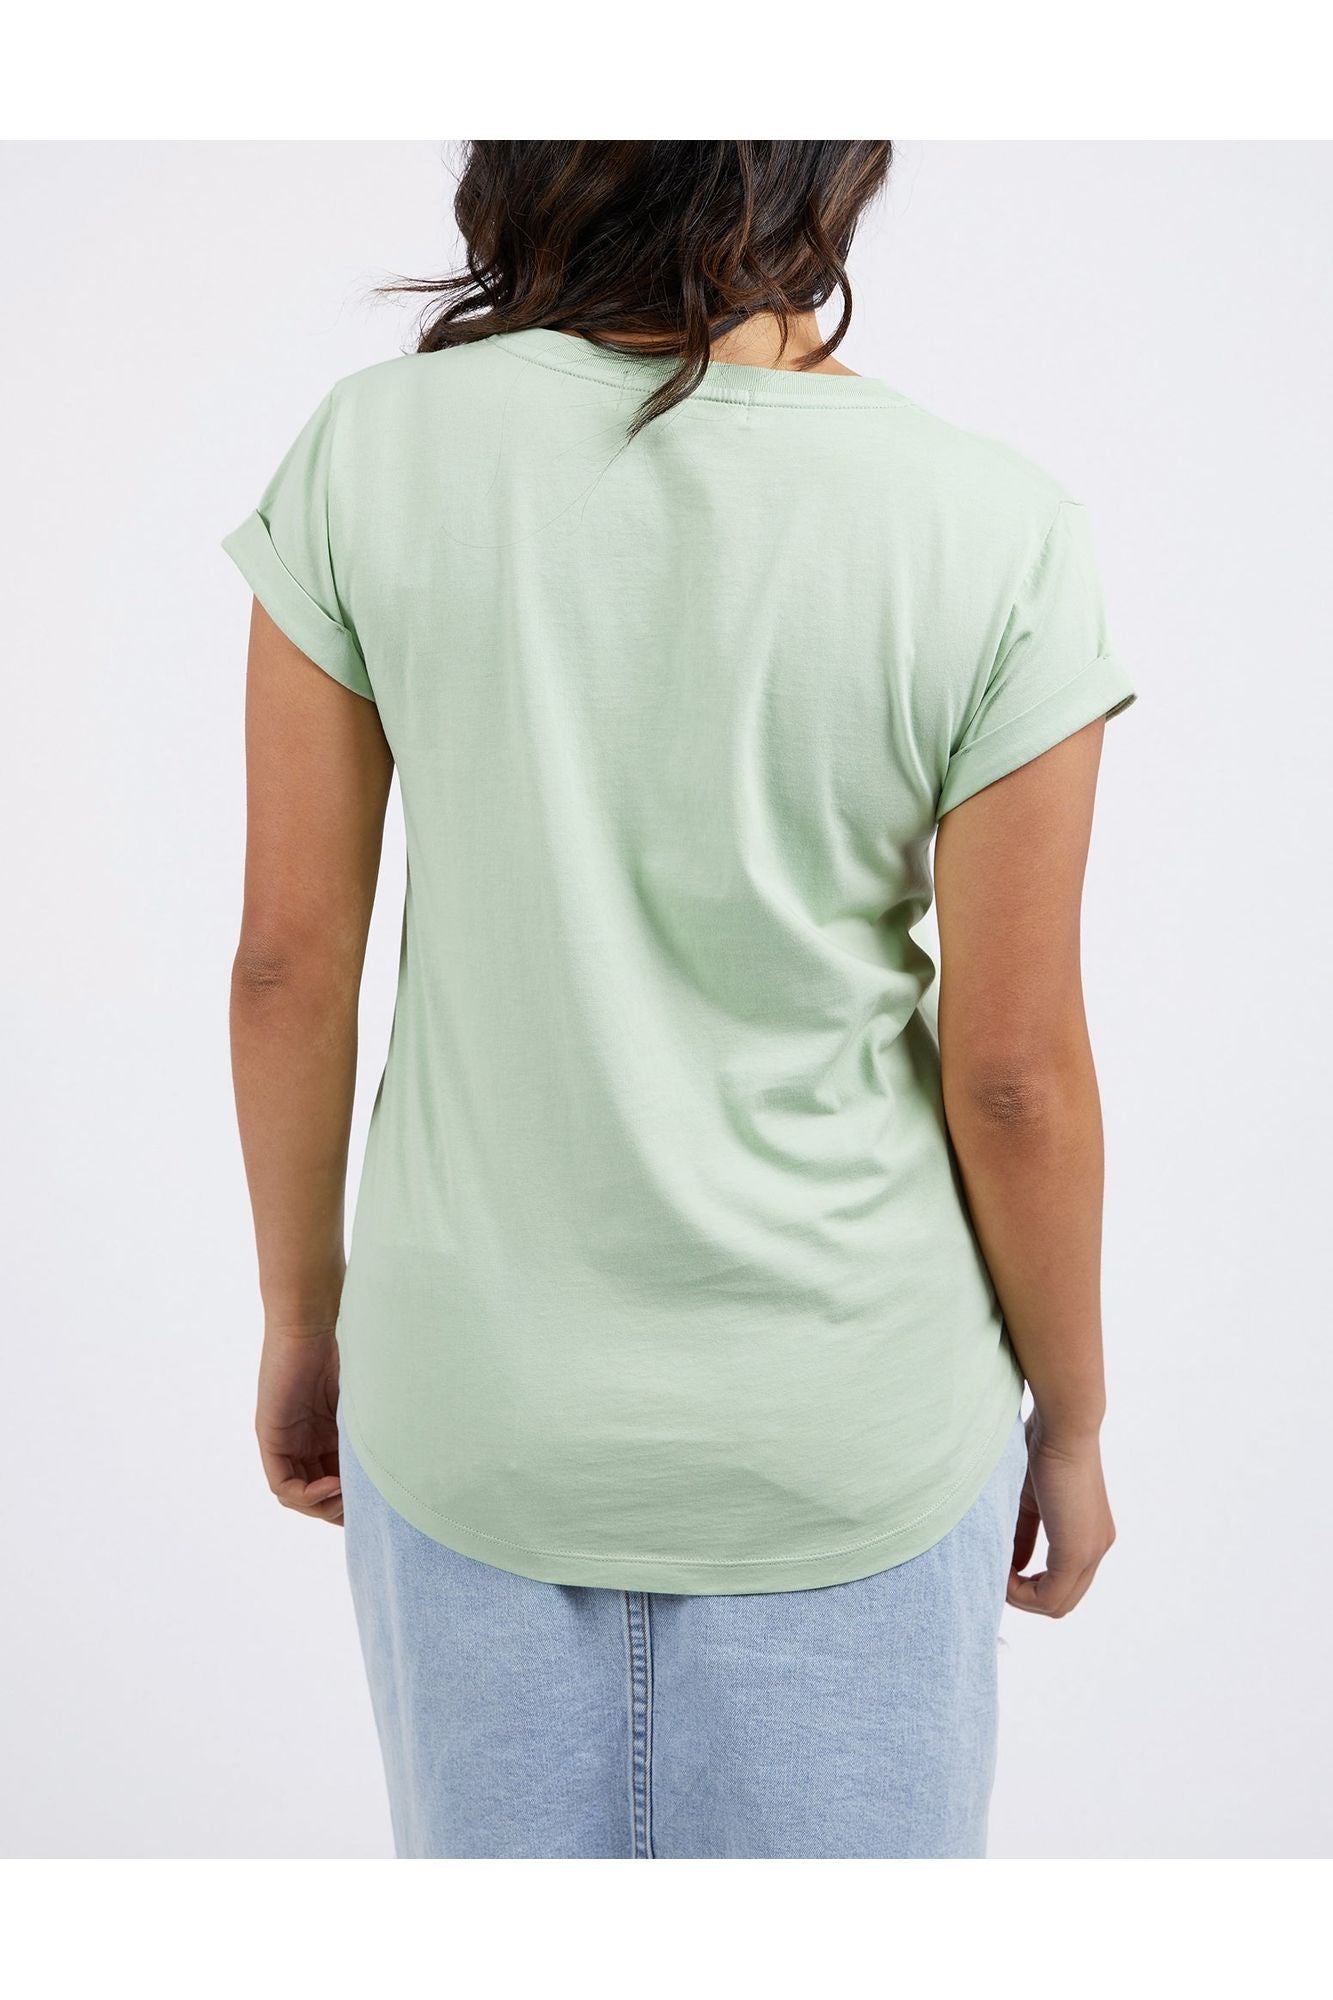 MANLY VEE TEE - Mint